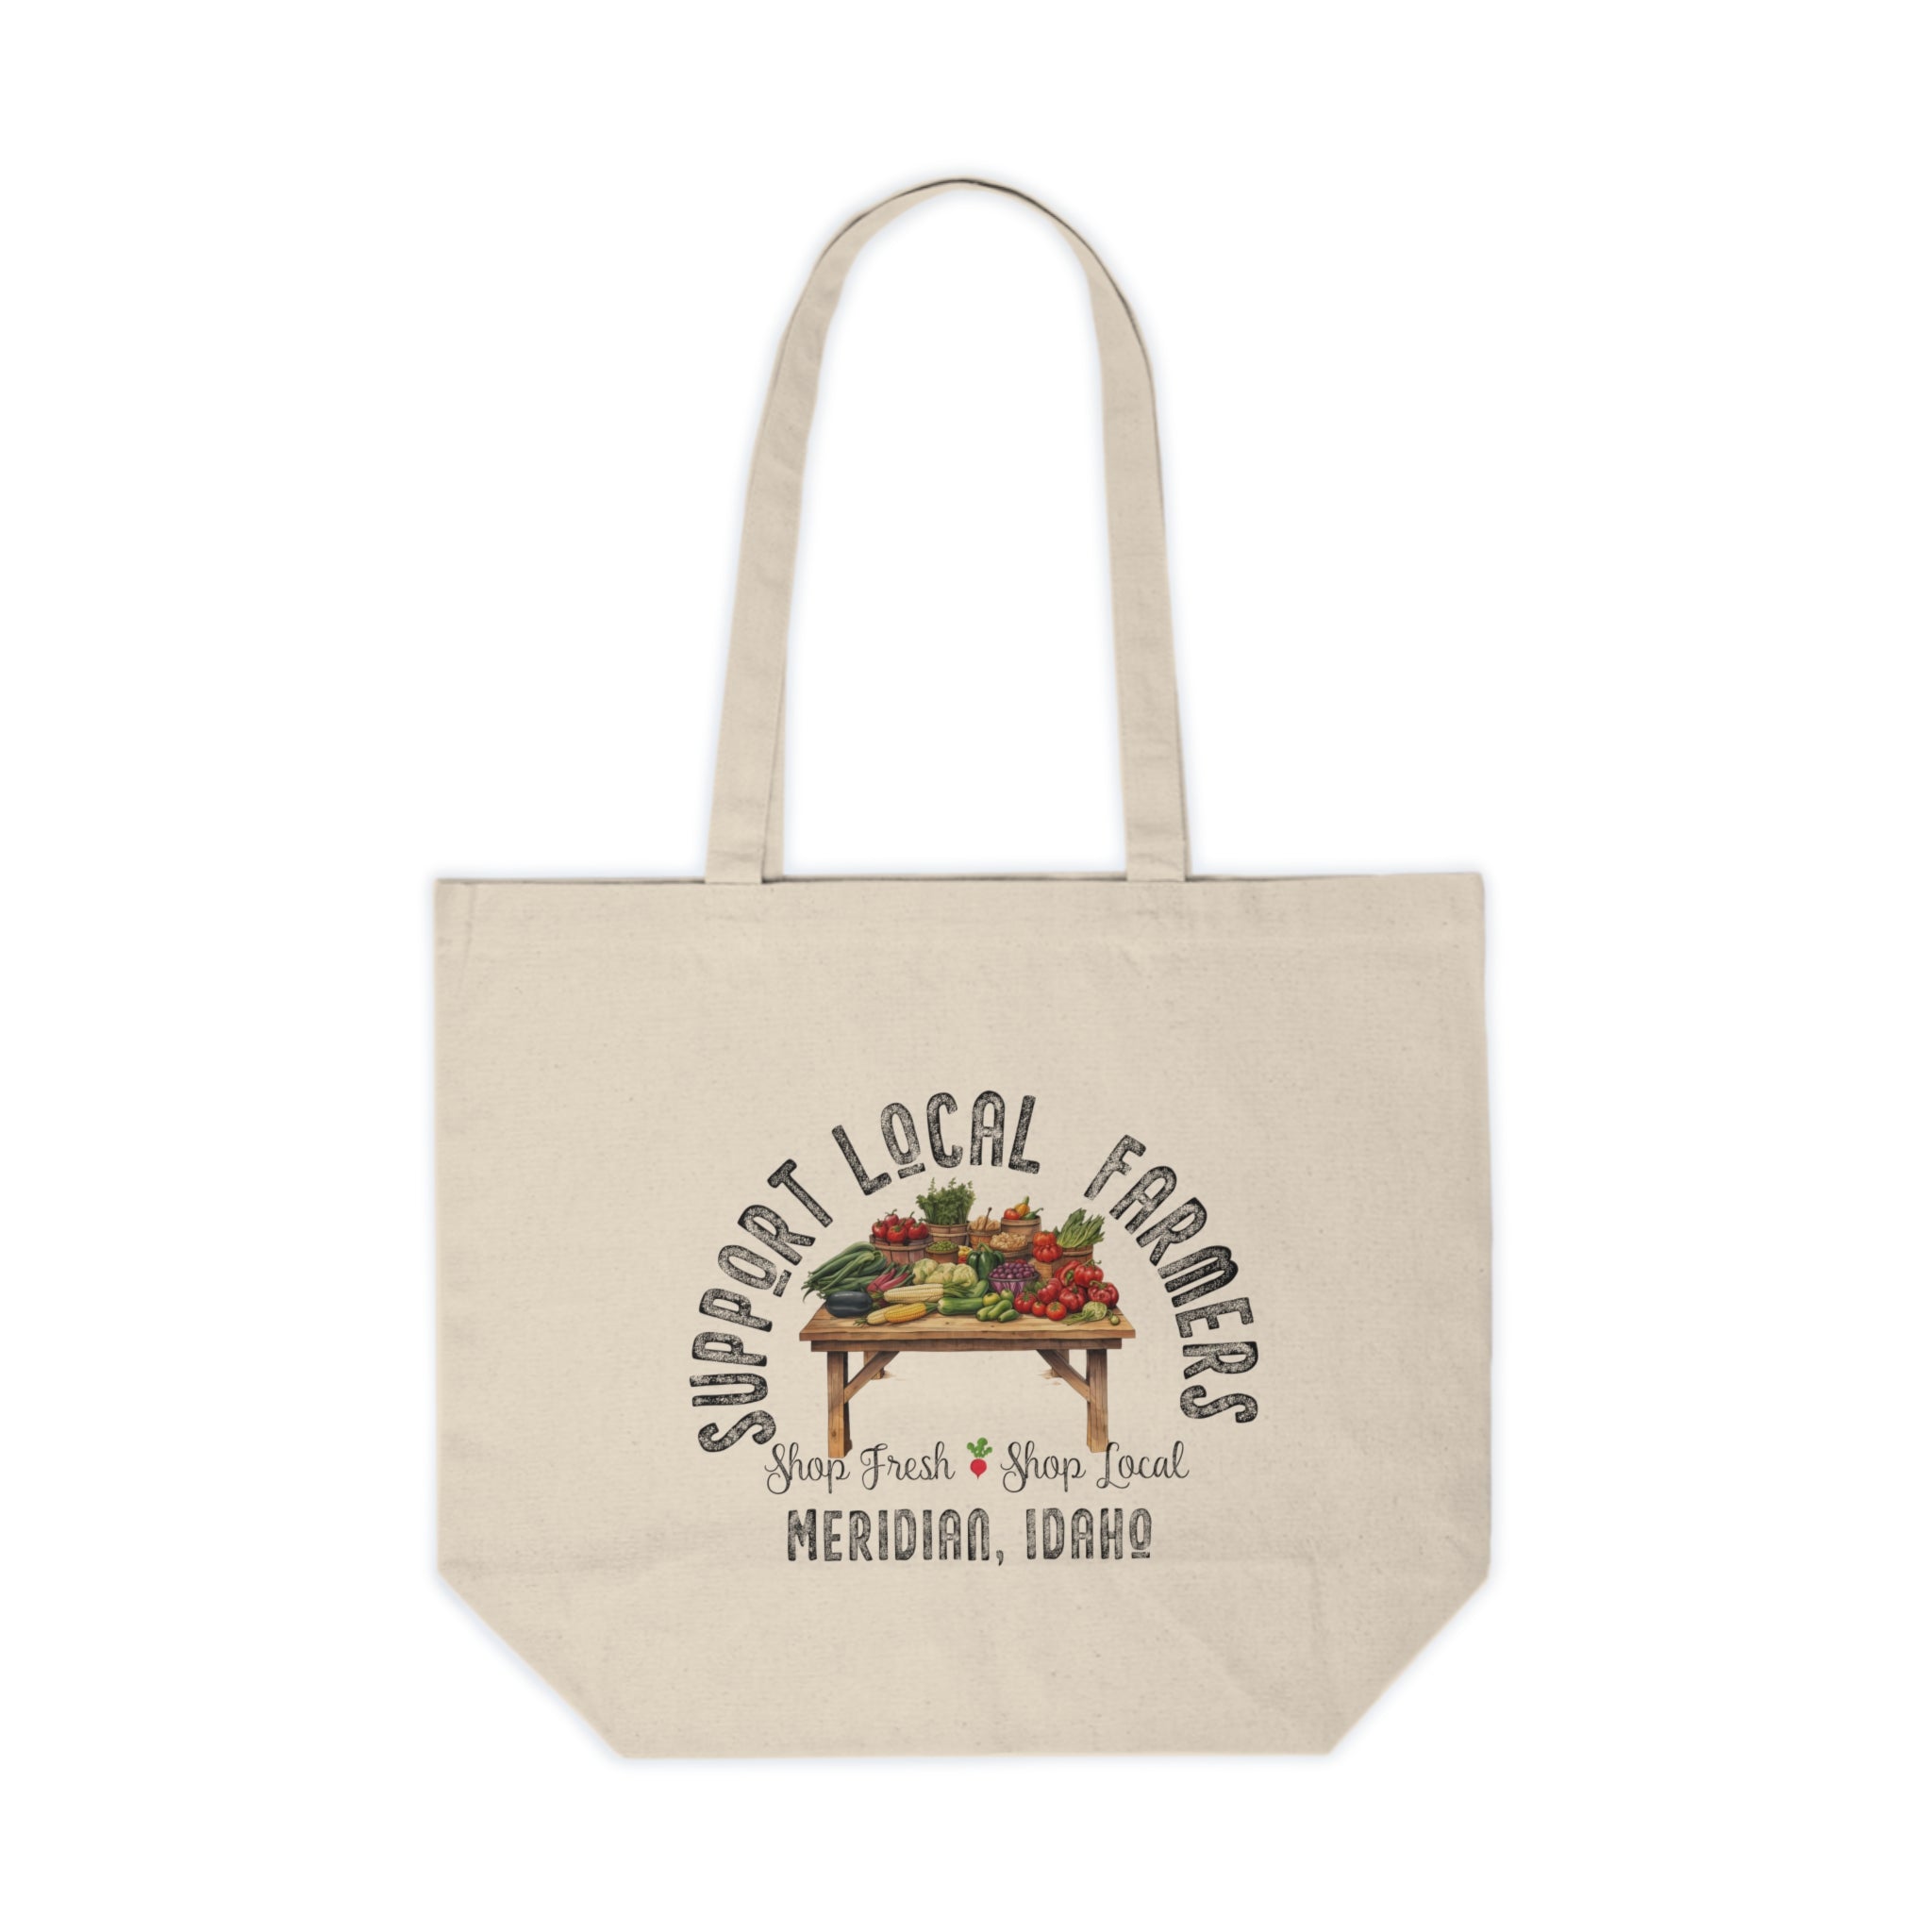 Support Local Farmers - Your City (Customizable) - Canvas Shopping Tote - Spruced Roost